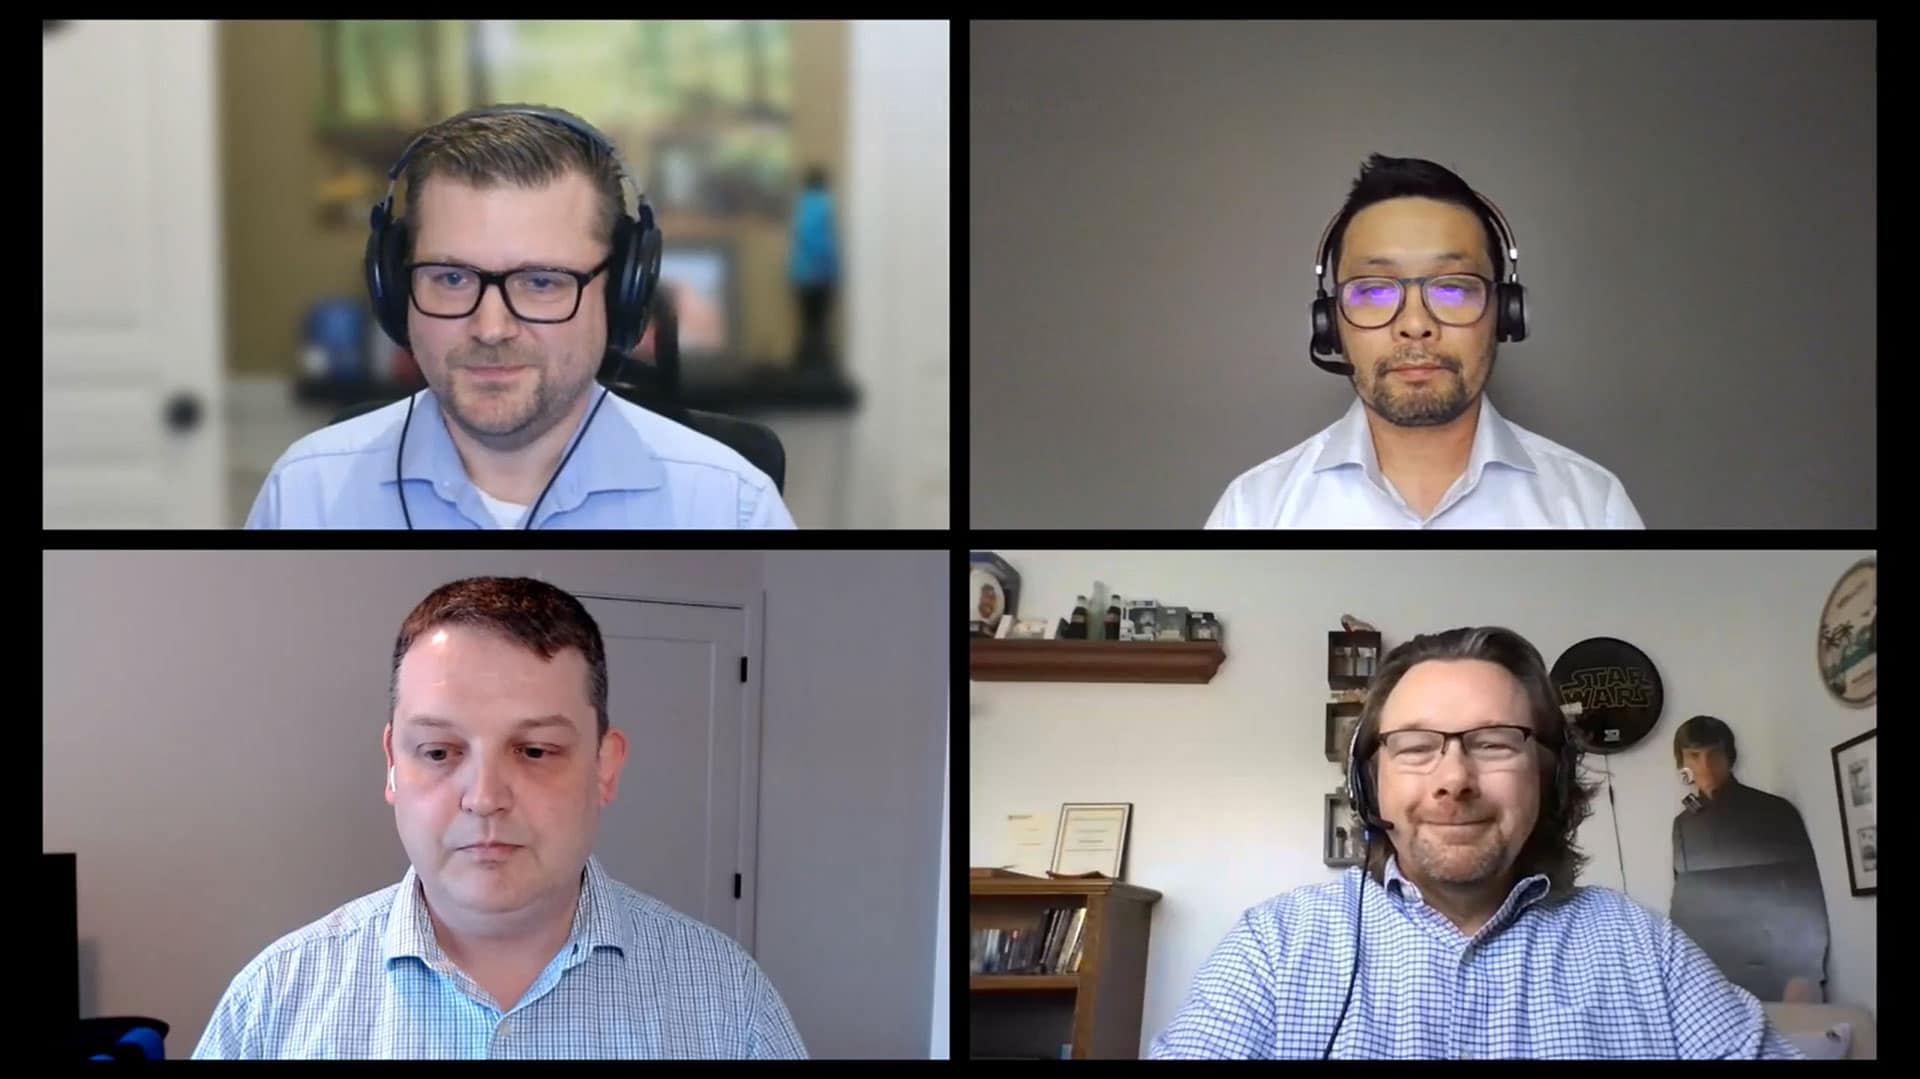 A panel of four experts sitting on a video call discussing about upcoming hybrid cloud technologies.